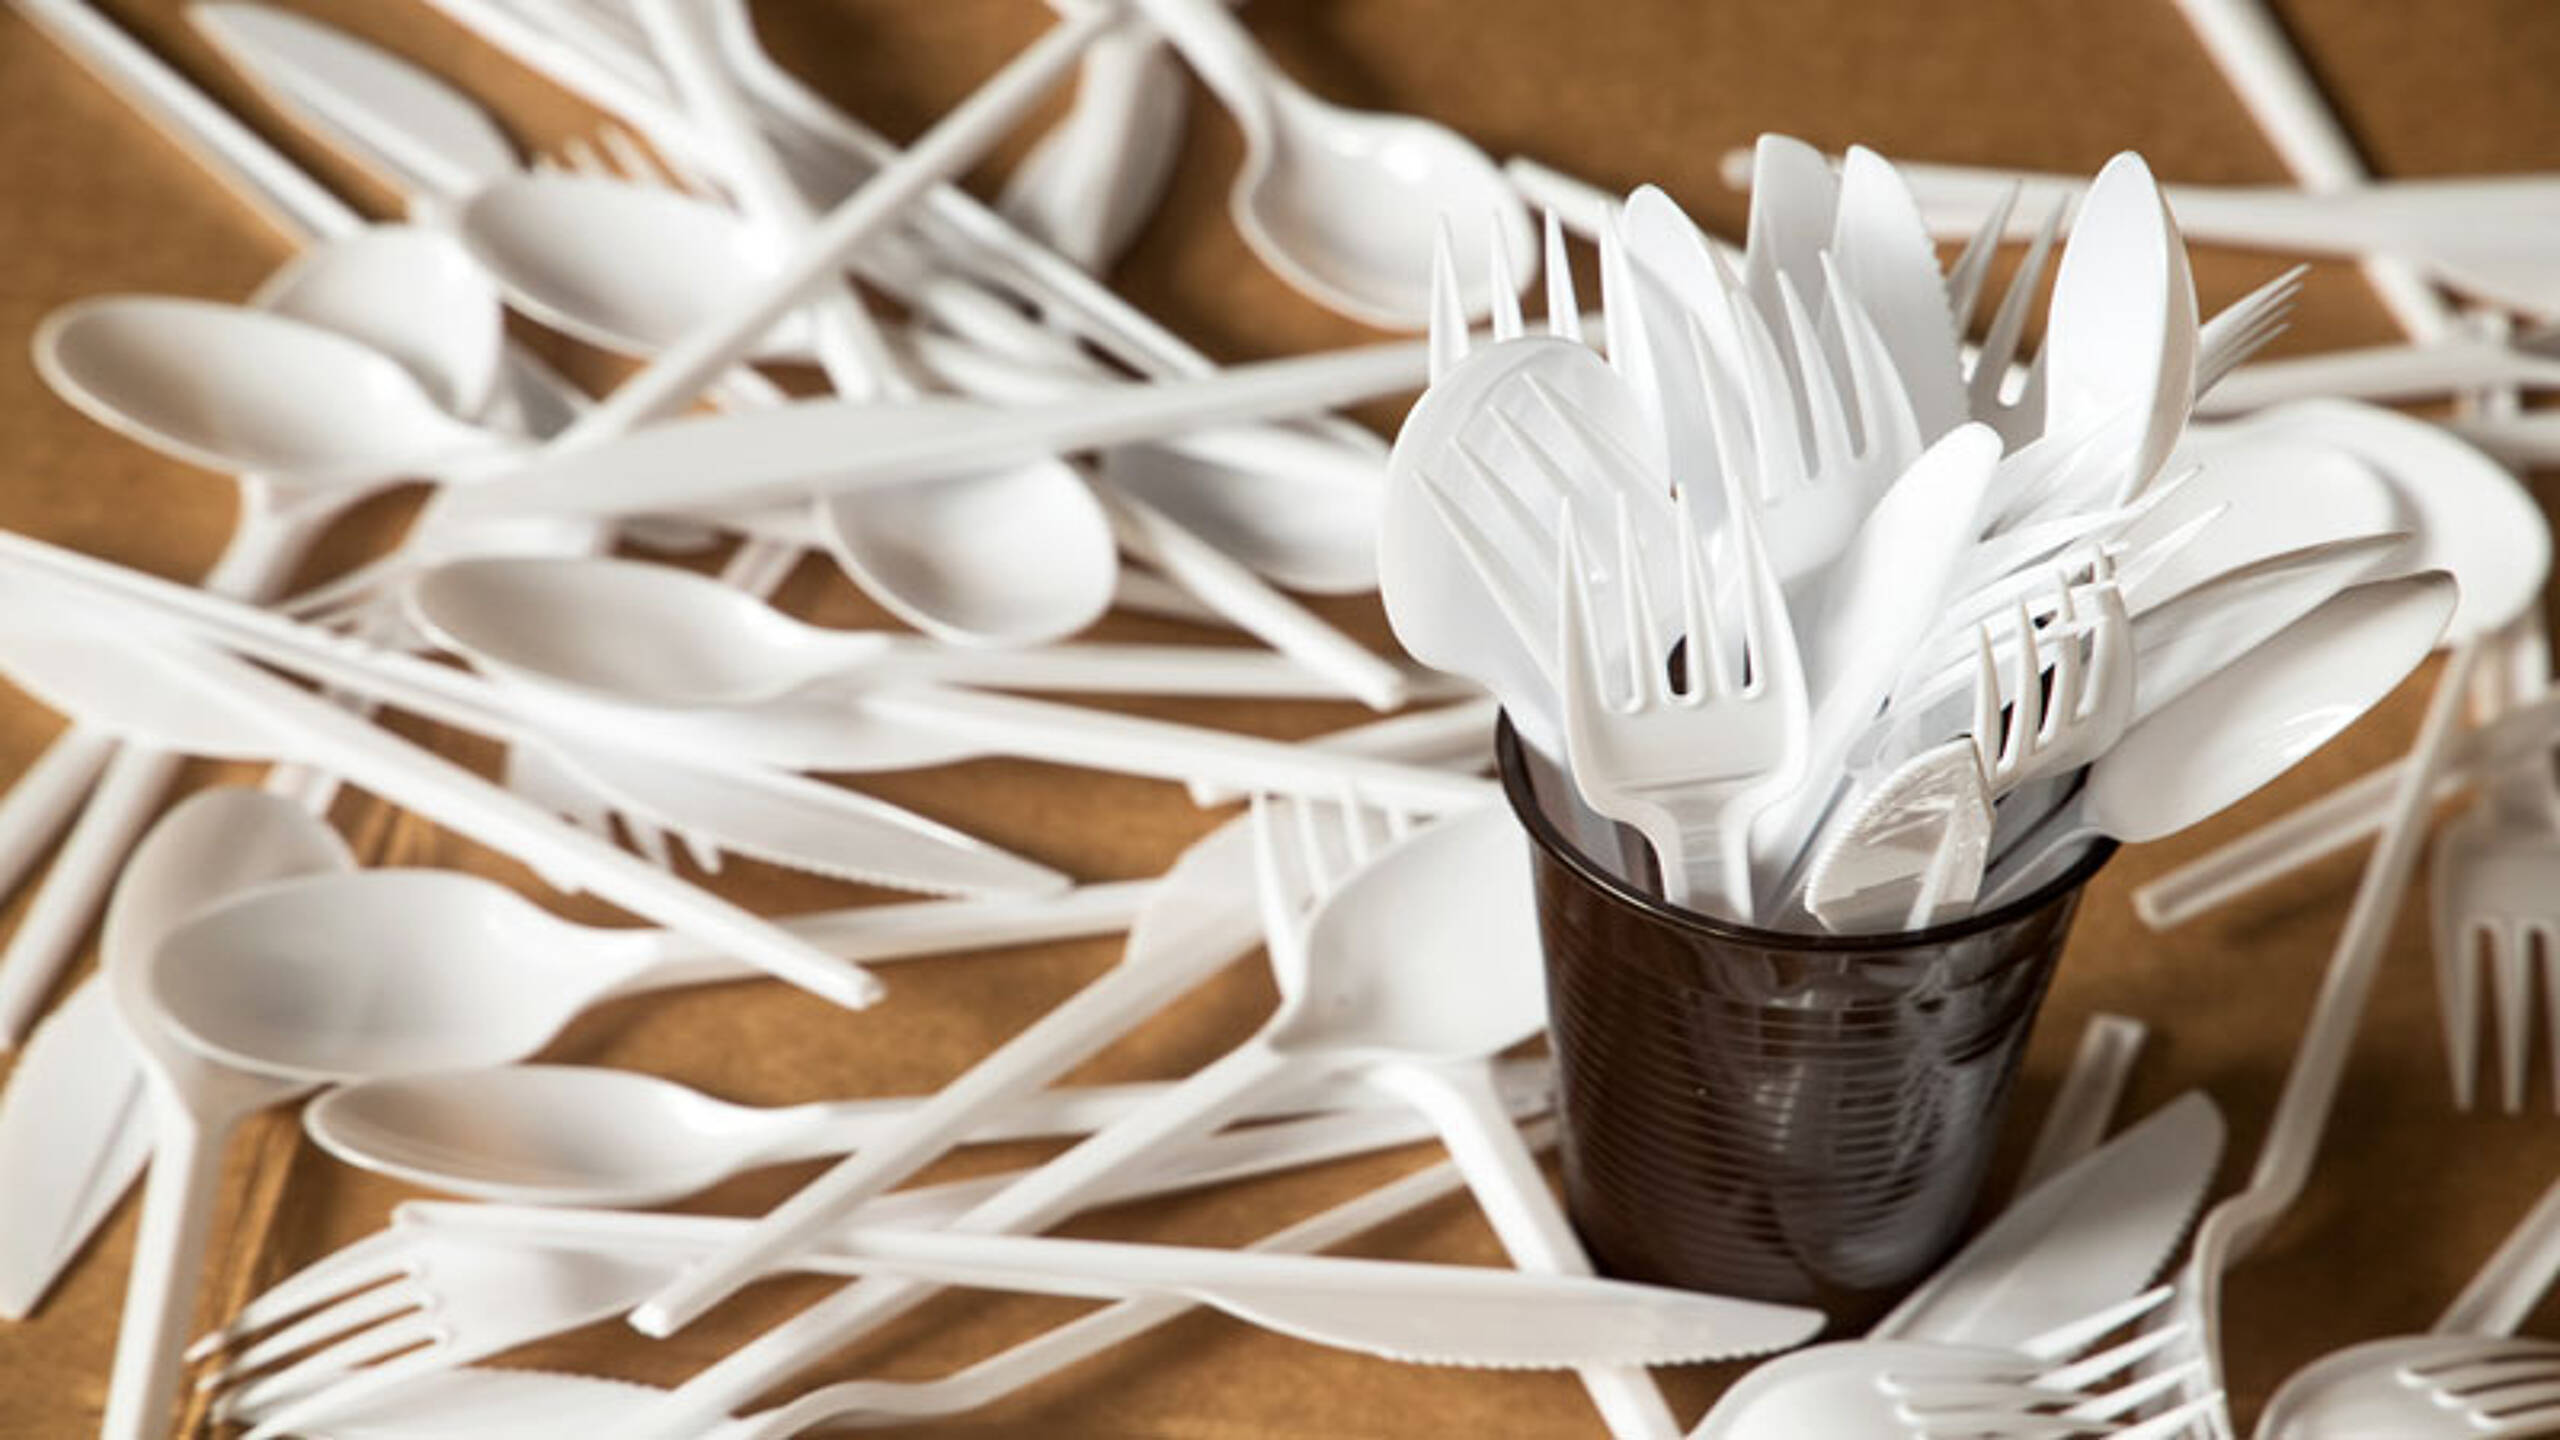 Single-use plastic cutlery and plates to be banned in England